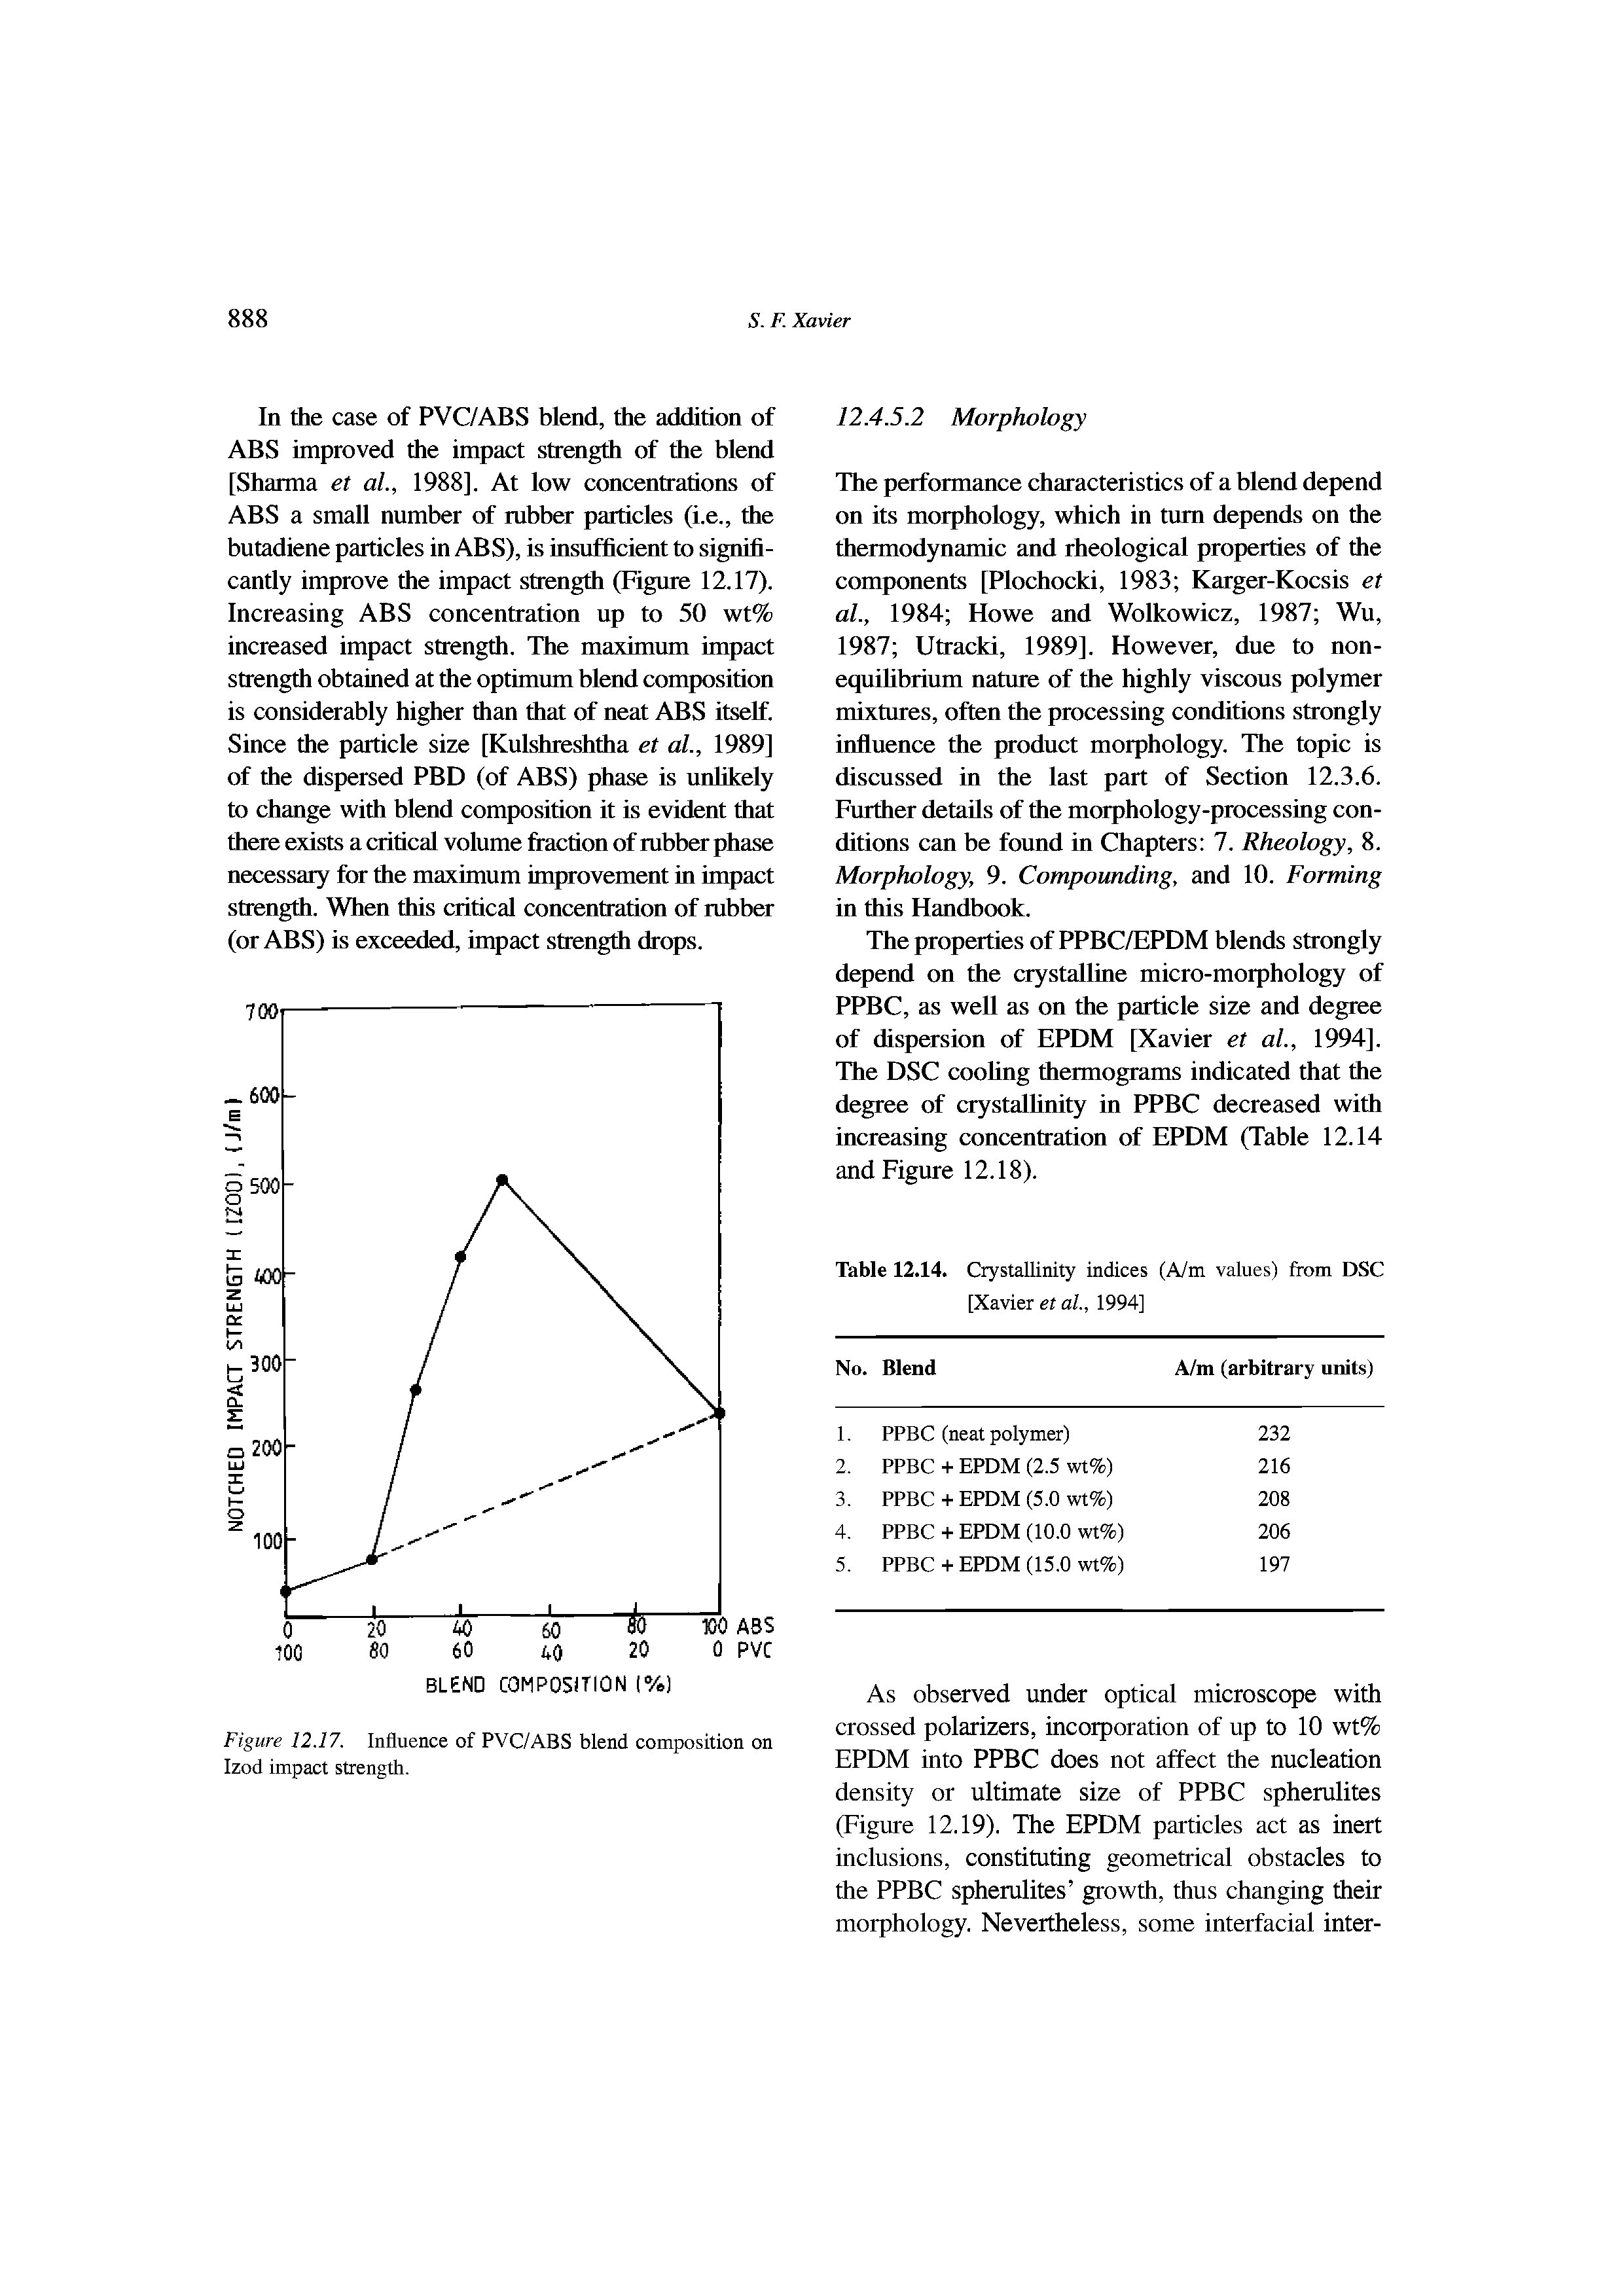 Figure 12.17. Influence of PVC/ABS blend composition on Izod impact strength.